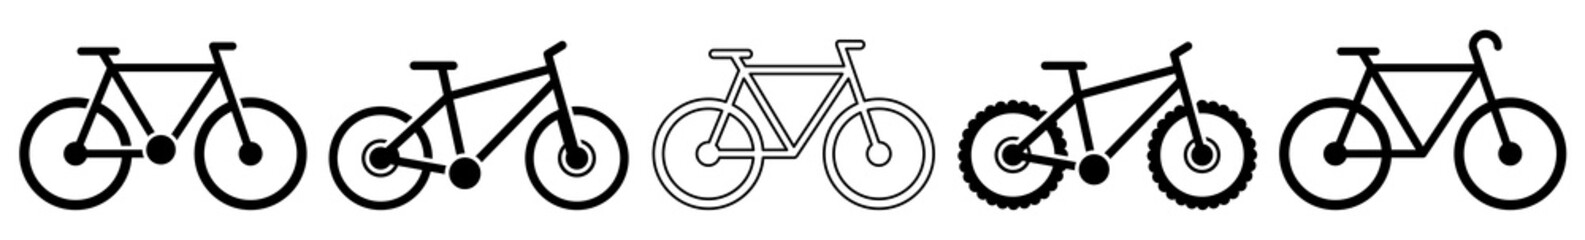 Bicycle Icon Riding Bicycle Set | Bicycles Icon Bike Vector Illustration Logo | Racing Bicycle Mountain Bicycle Icon Isolated Cycle Collection